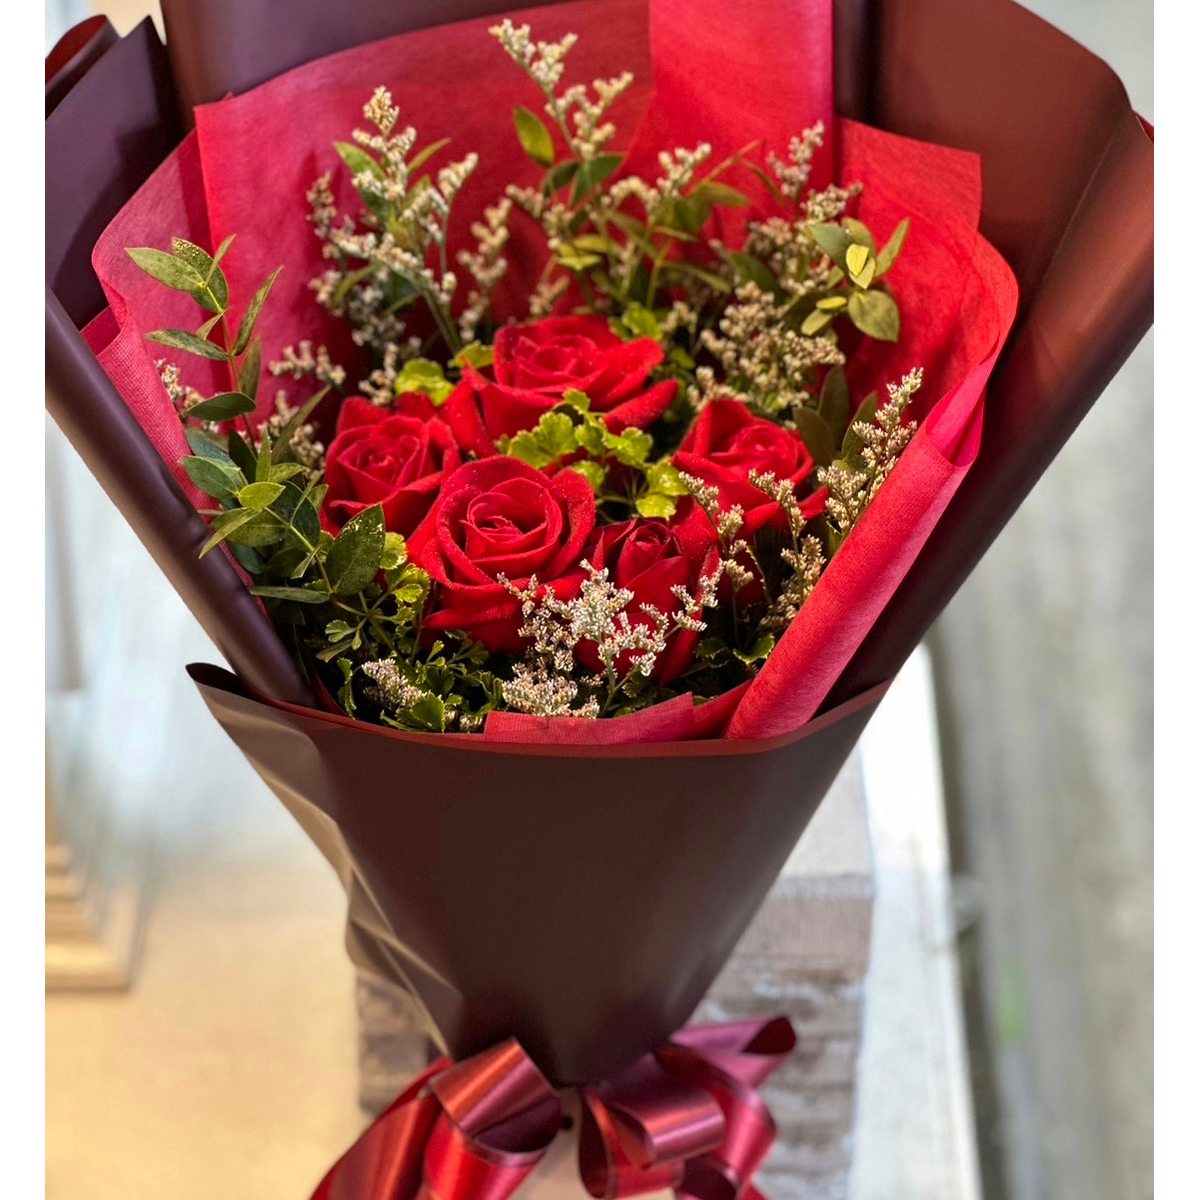 "Love Story" bouquet of 5 red roses